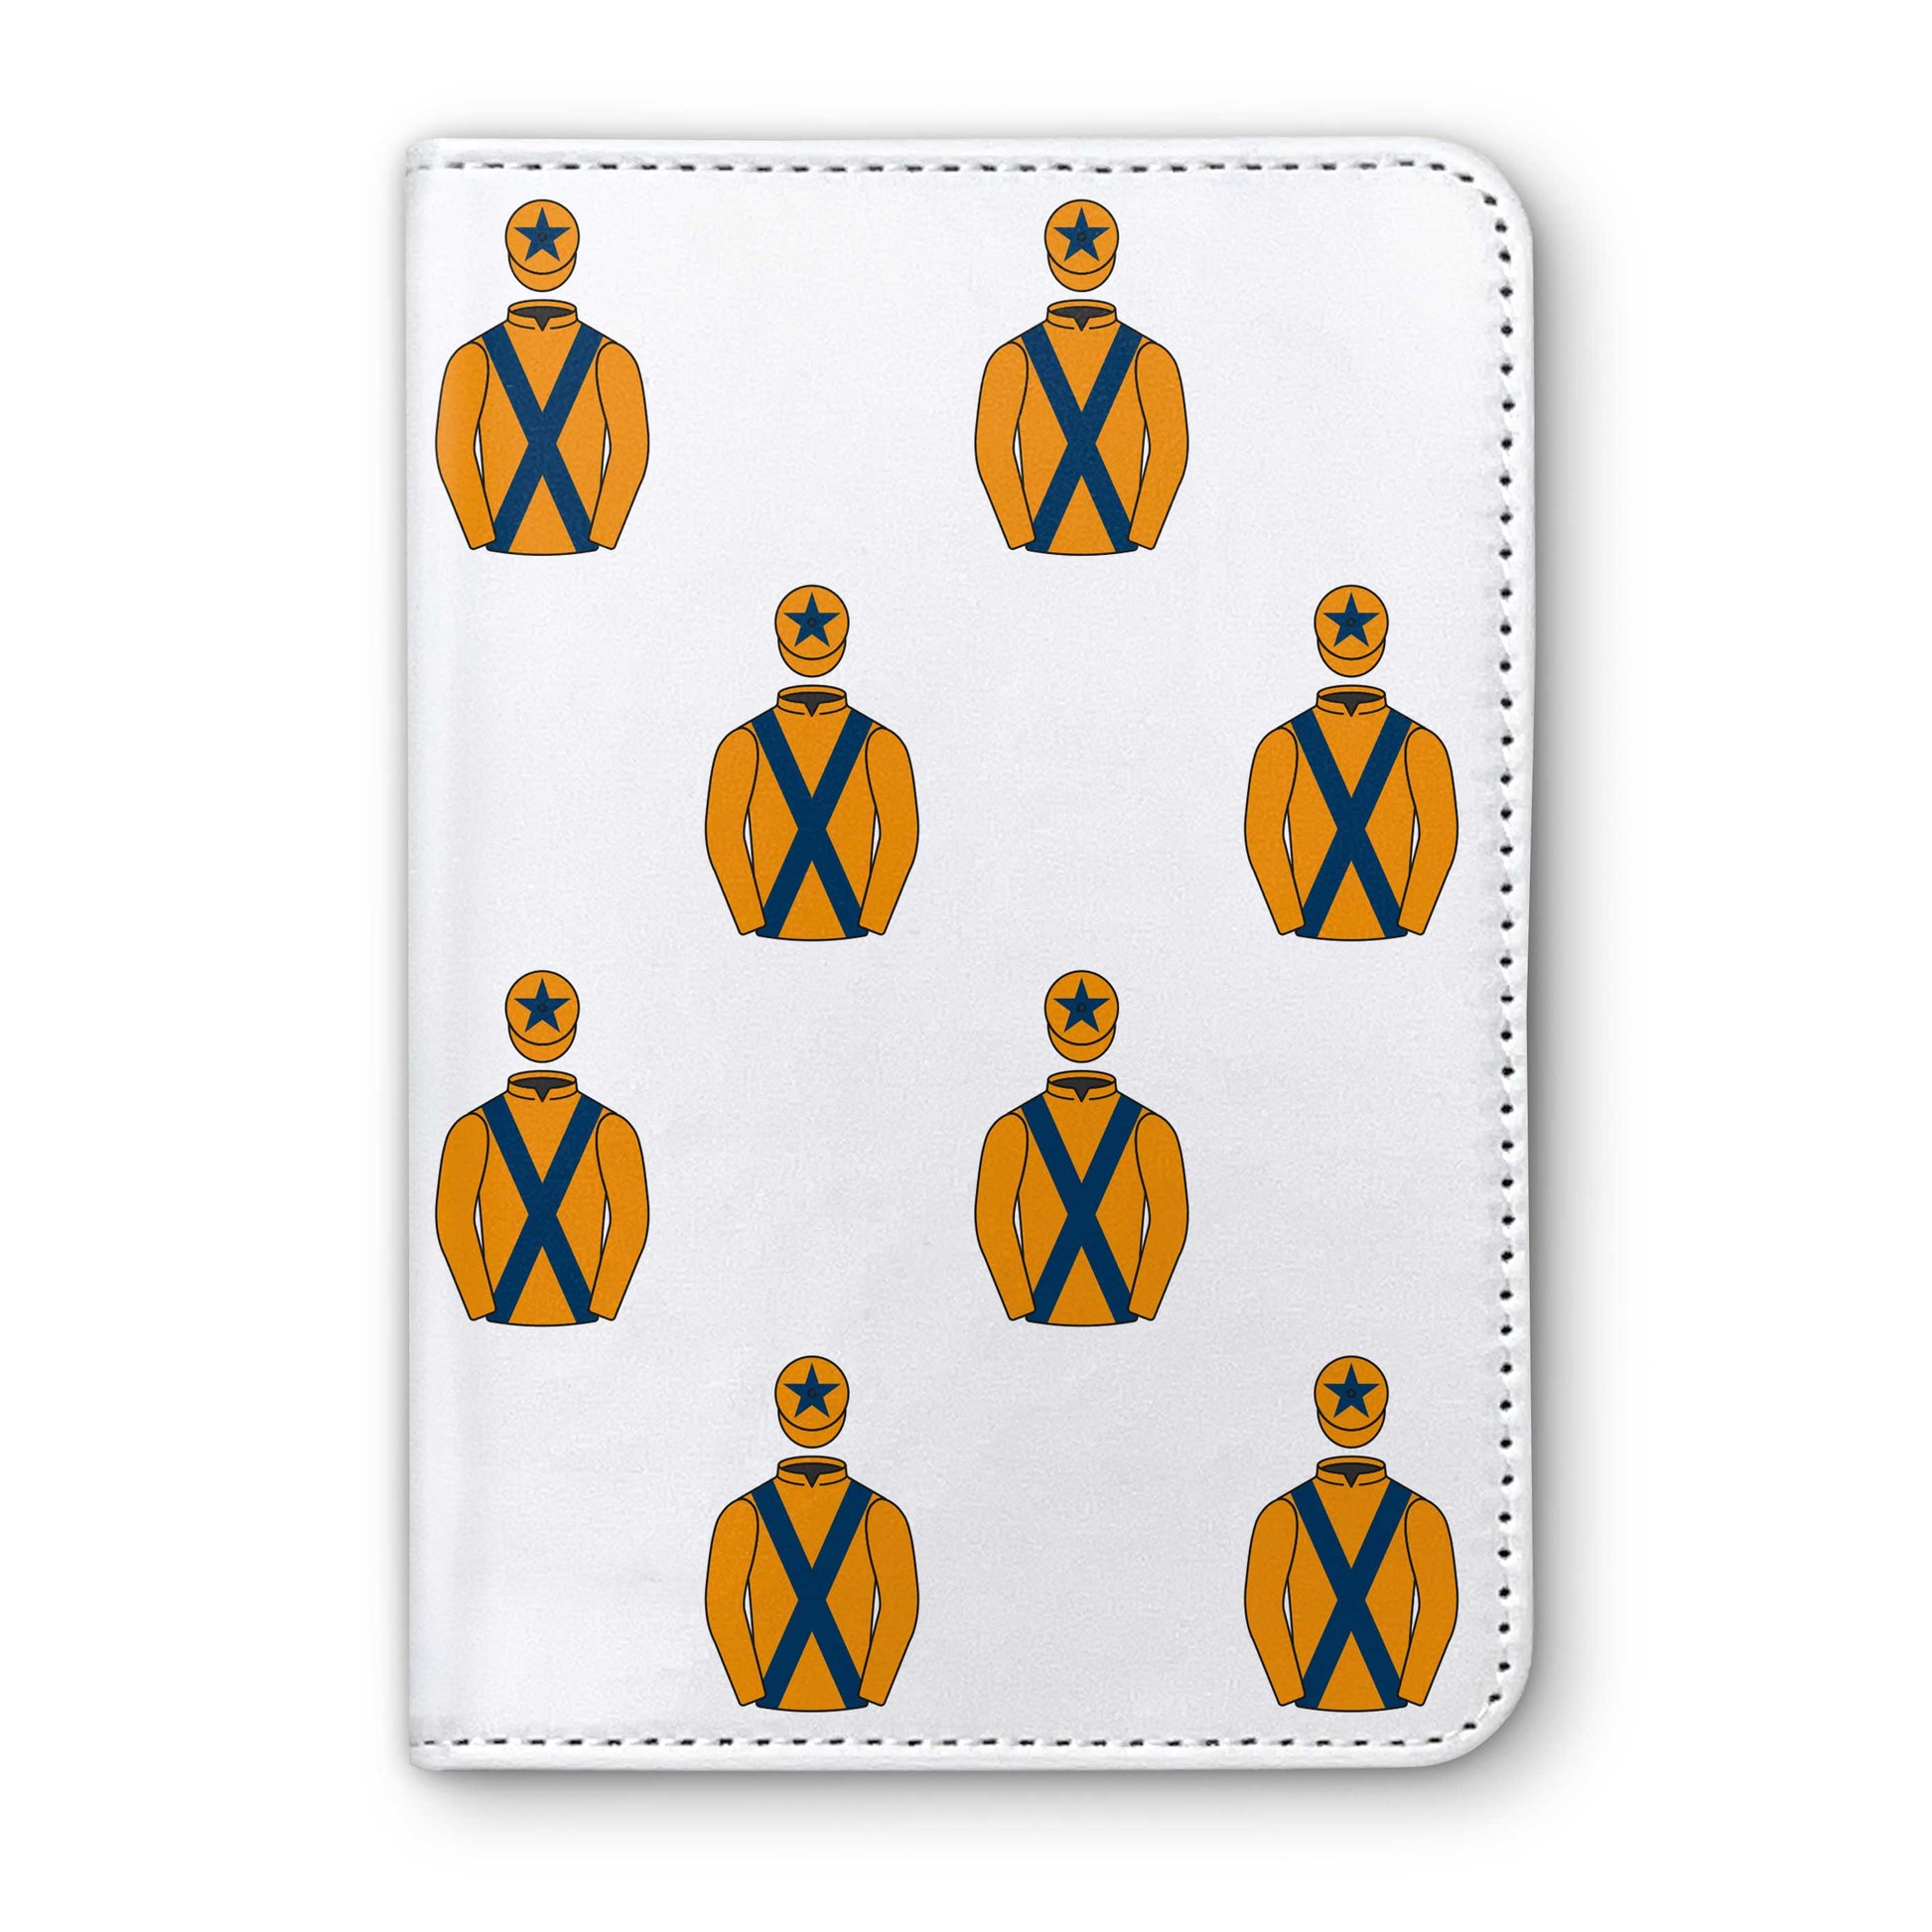 Mrs J May  Horse Racing Passport Holder - Hacked Up Horse Racing Gifts